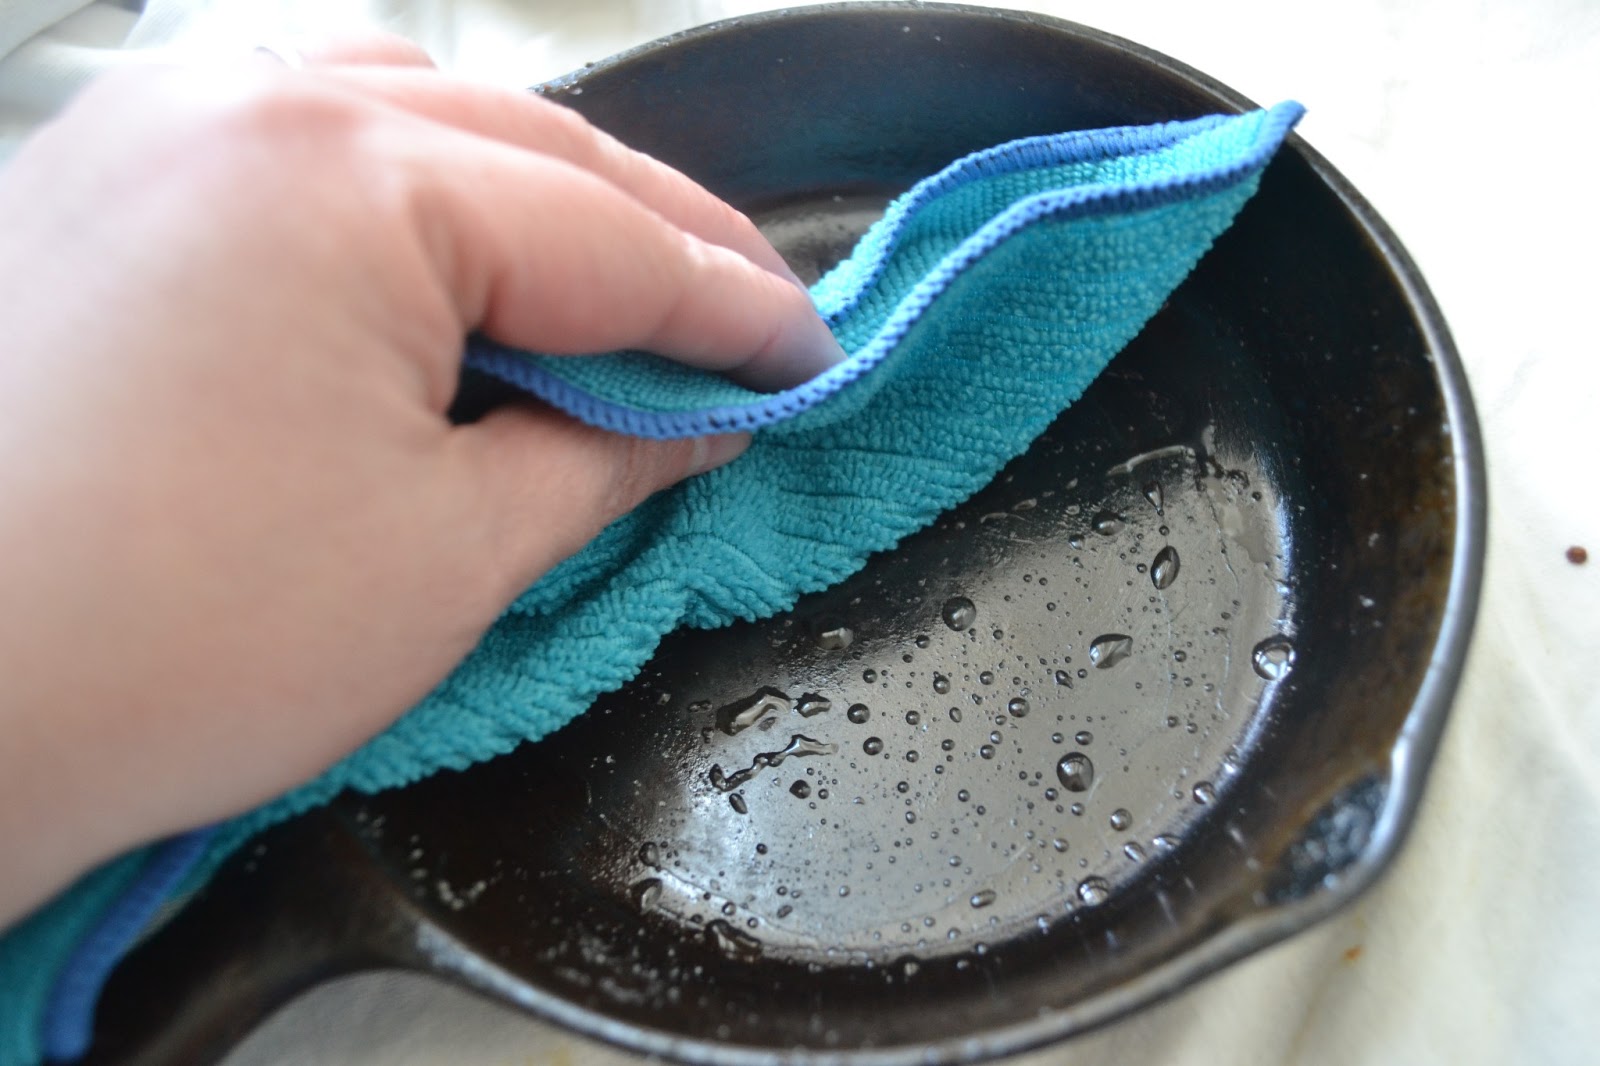 TIP GARDEN: How to Clean a Cast Iron Pan